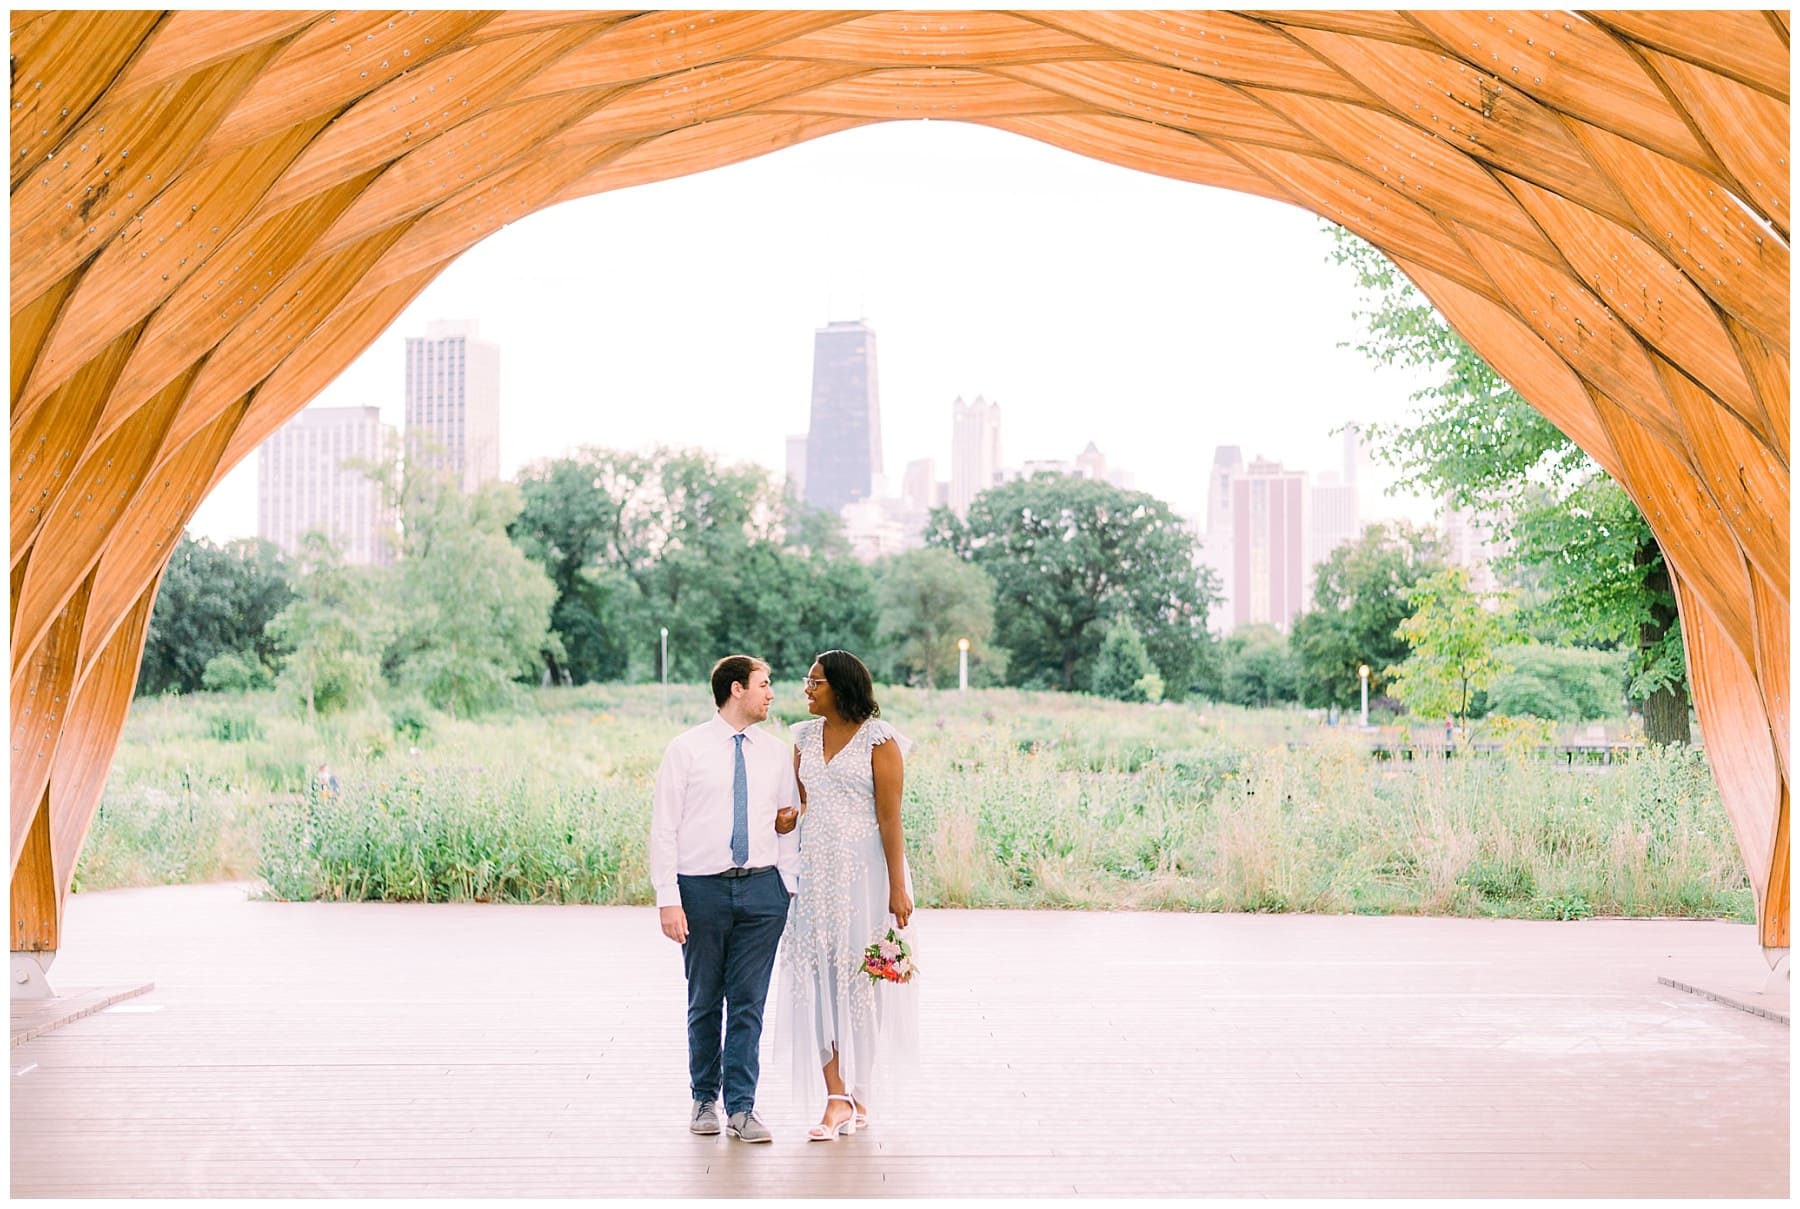 Caelynne Justin Engagement Lincoln Park Nature Boardwalk Chicago IL 2020 20